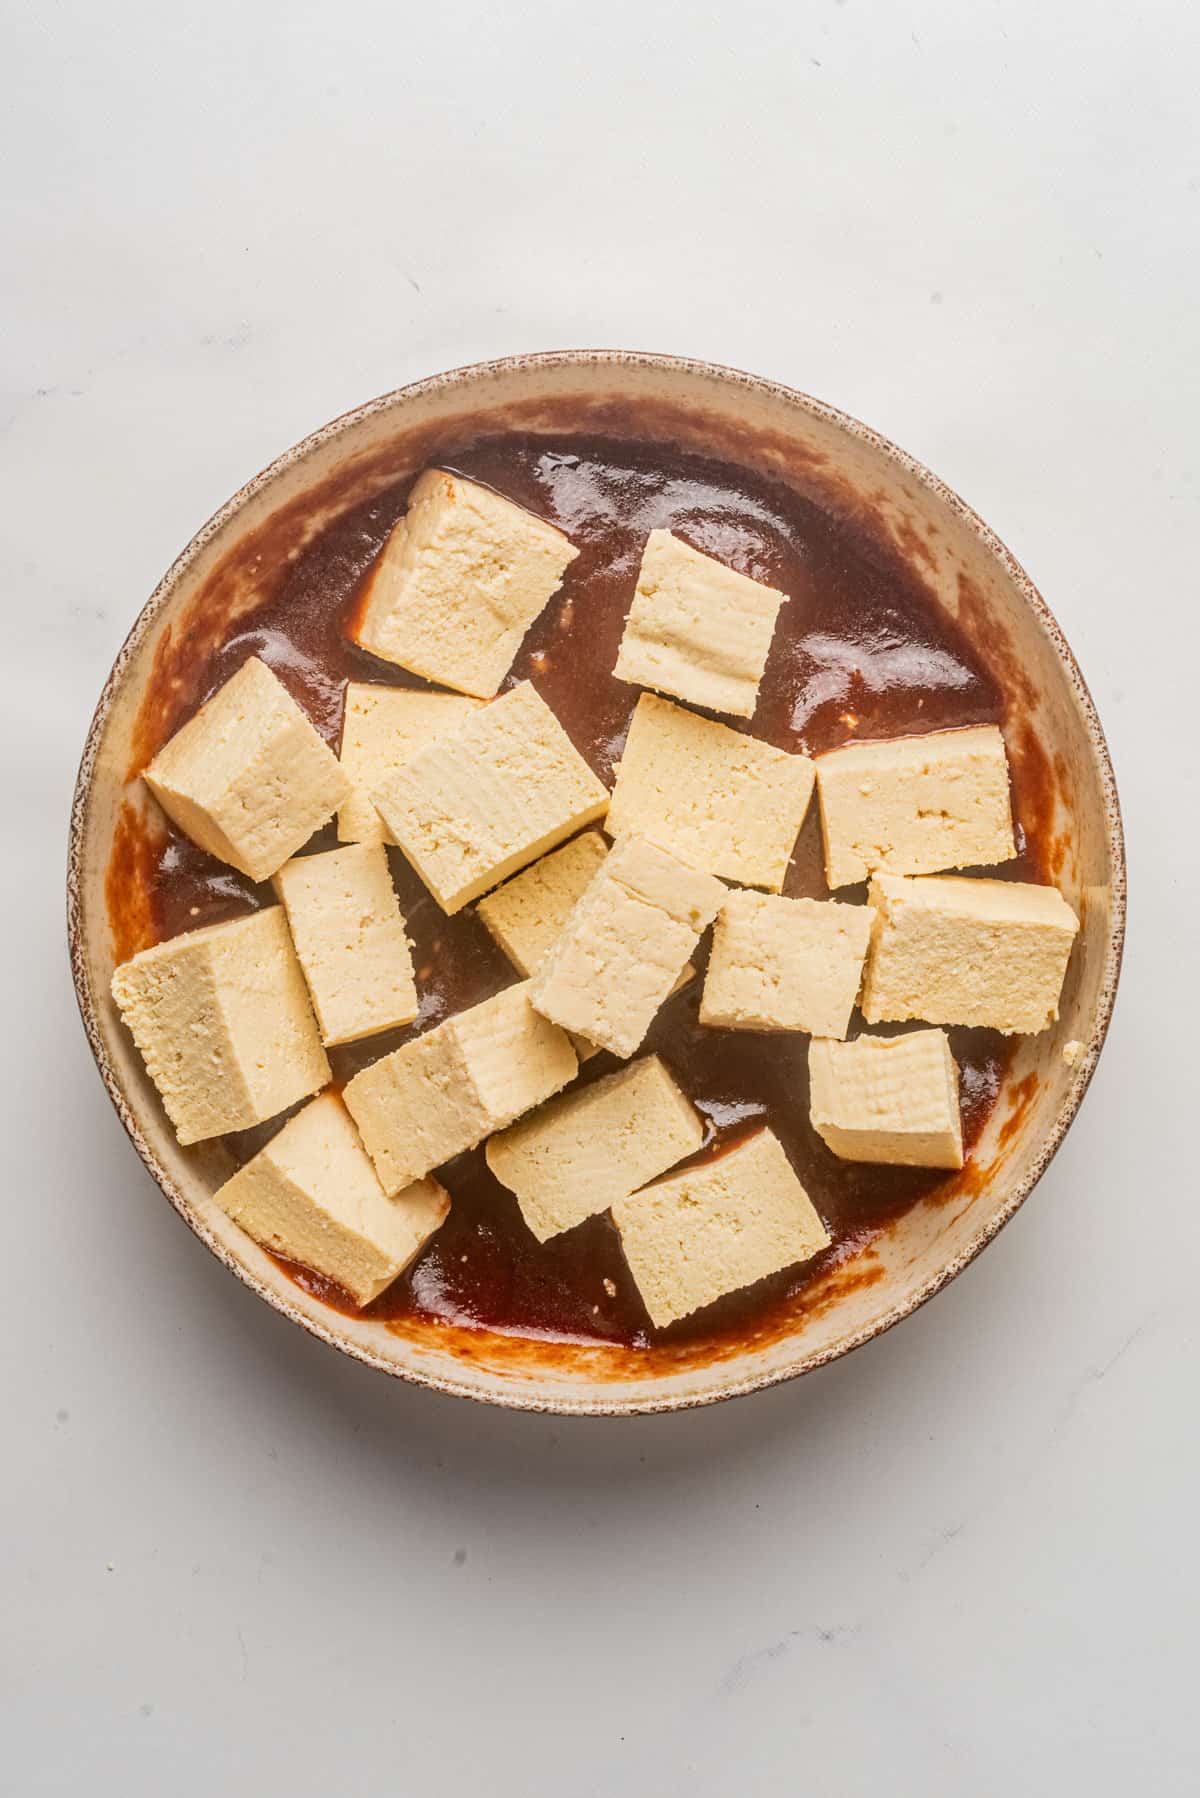 An image of a tofu added in a bowl of the gochujang sauce mixture.